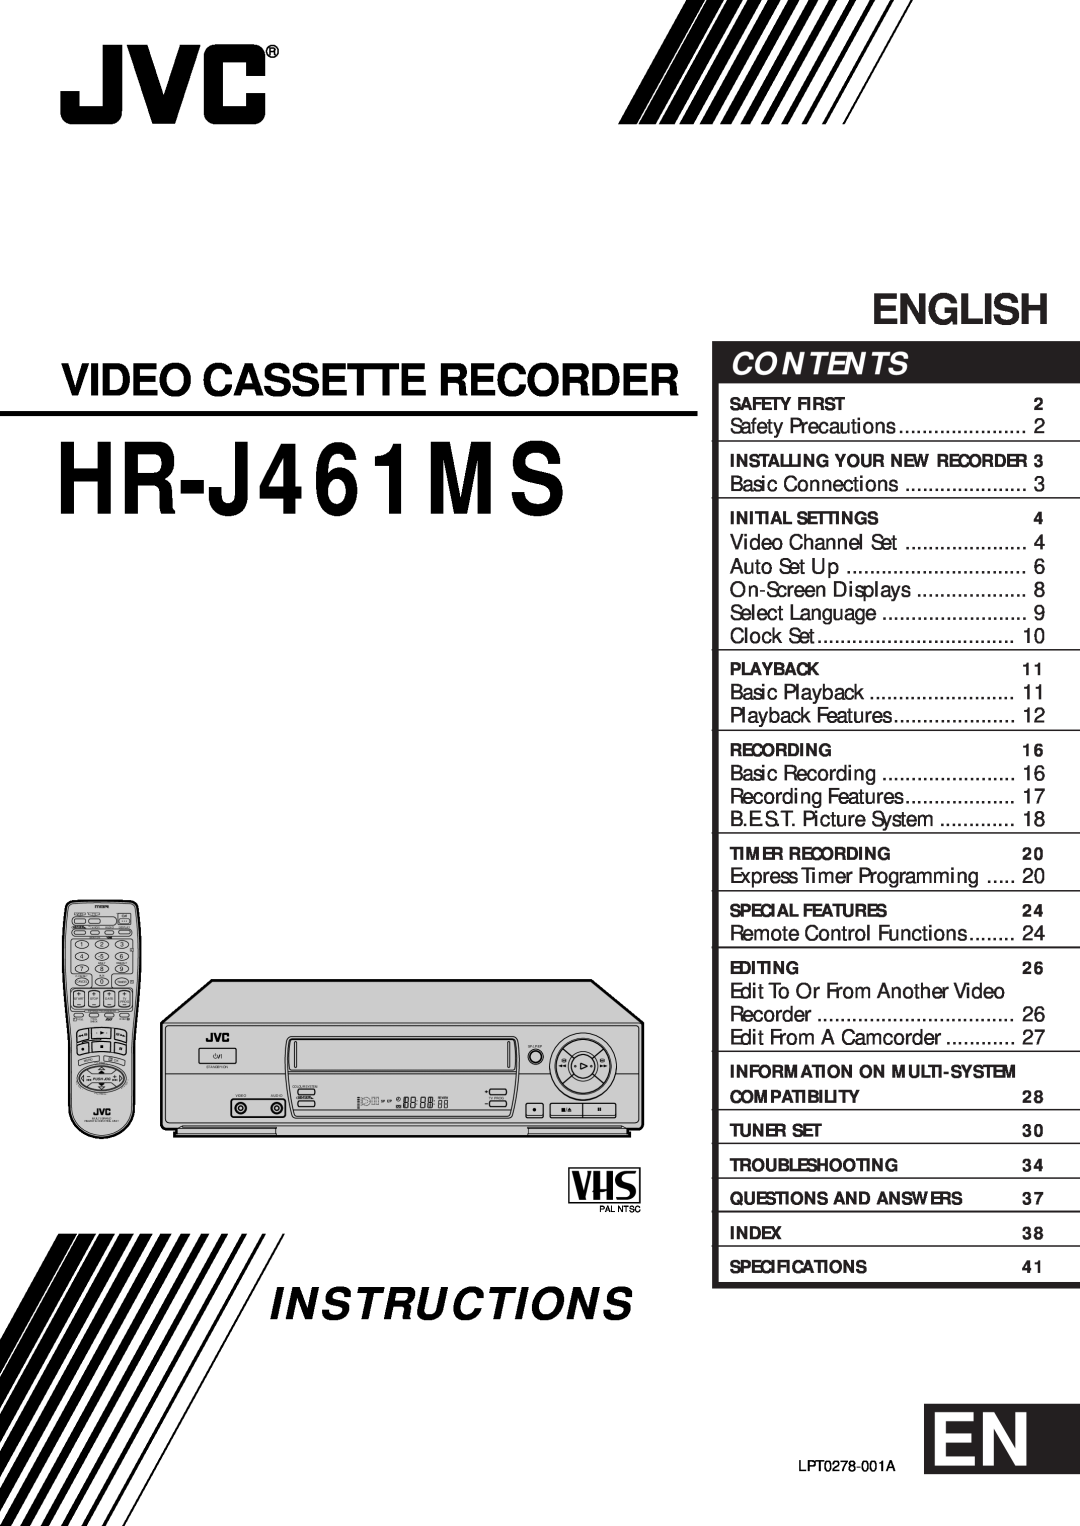 JVC HR-J461MS specifications Video Cassette Recorder, Instructions, English, Contents 